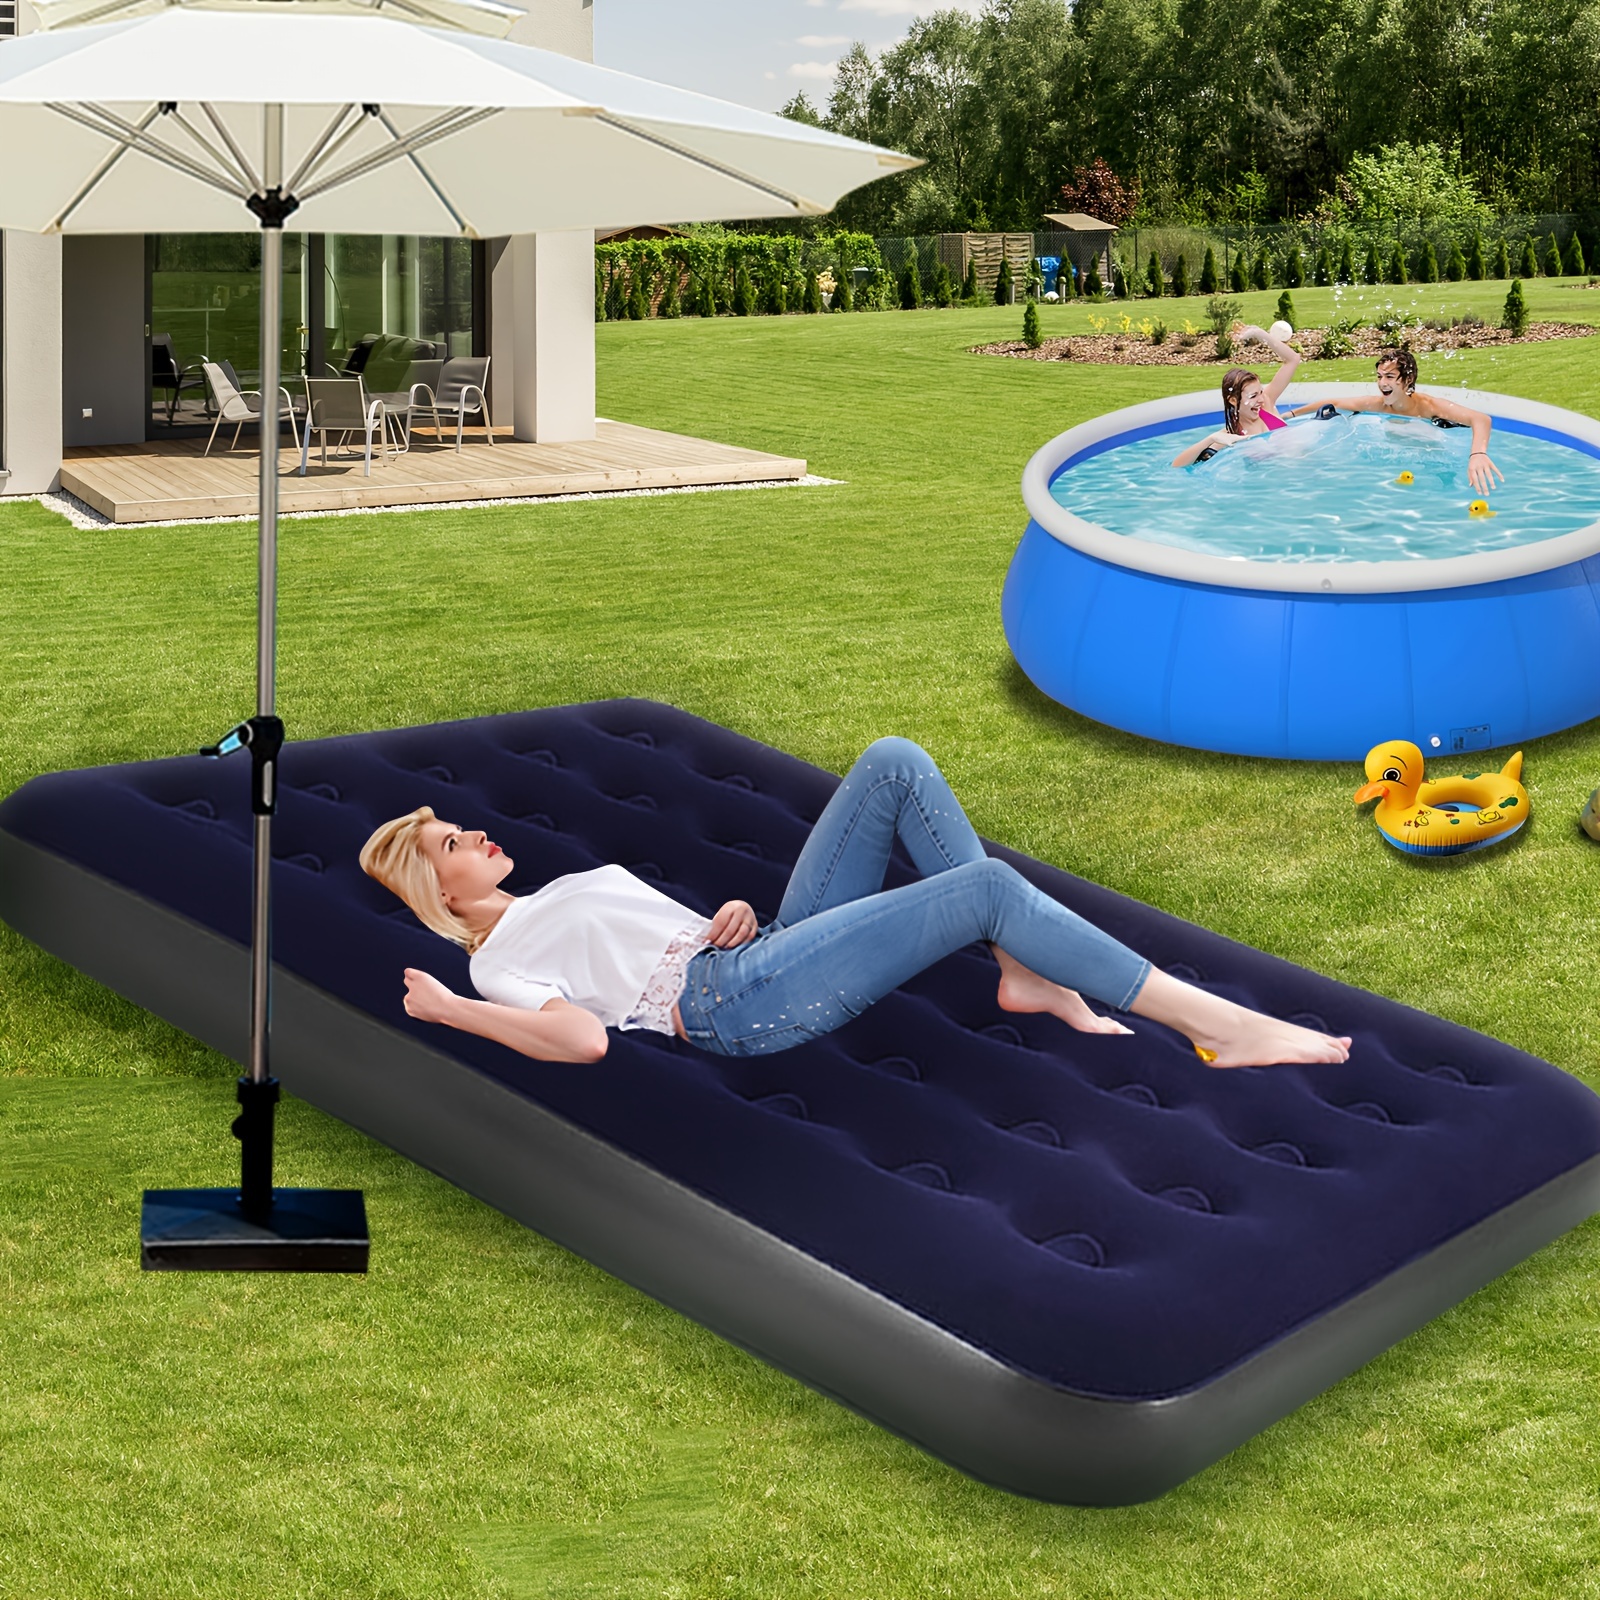 

Large Portable Inflatable Mattress, Flocking Fabric Comfortable Air Mattress, For Summer Indoor Outdoor Yard Camping